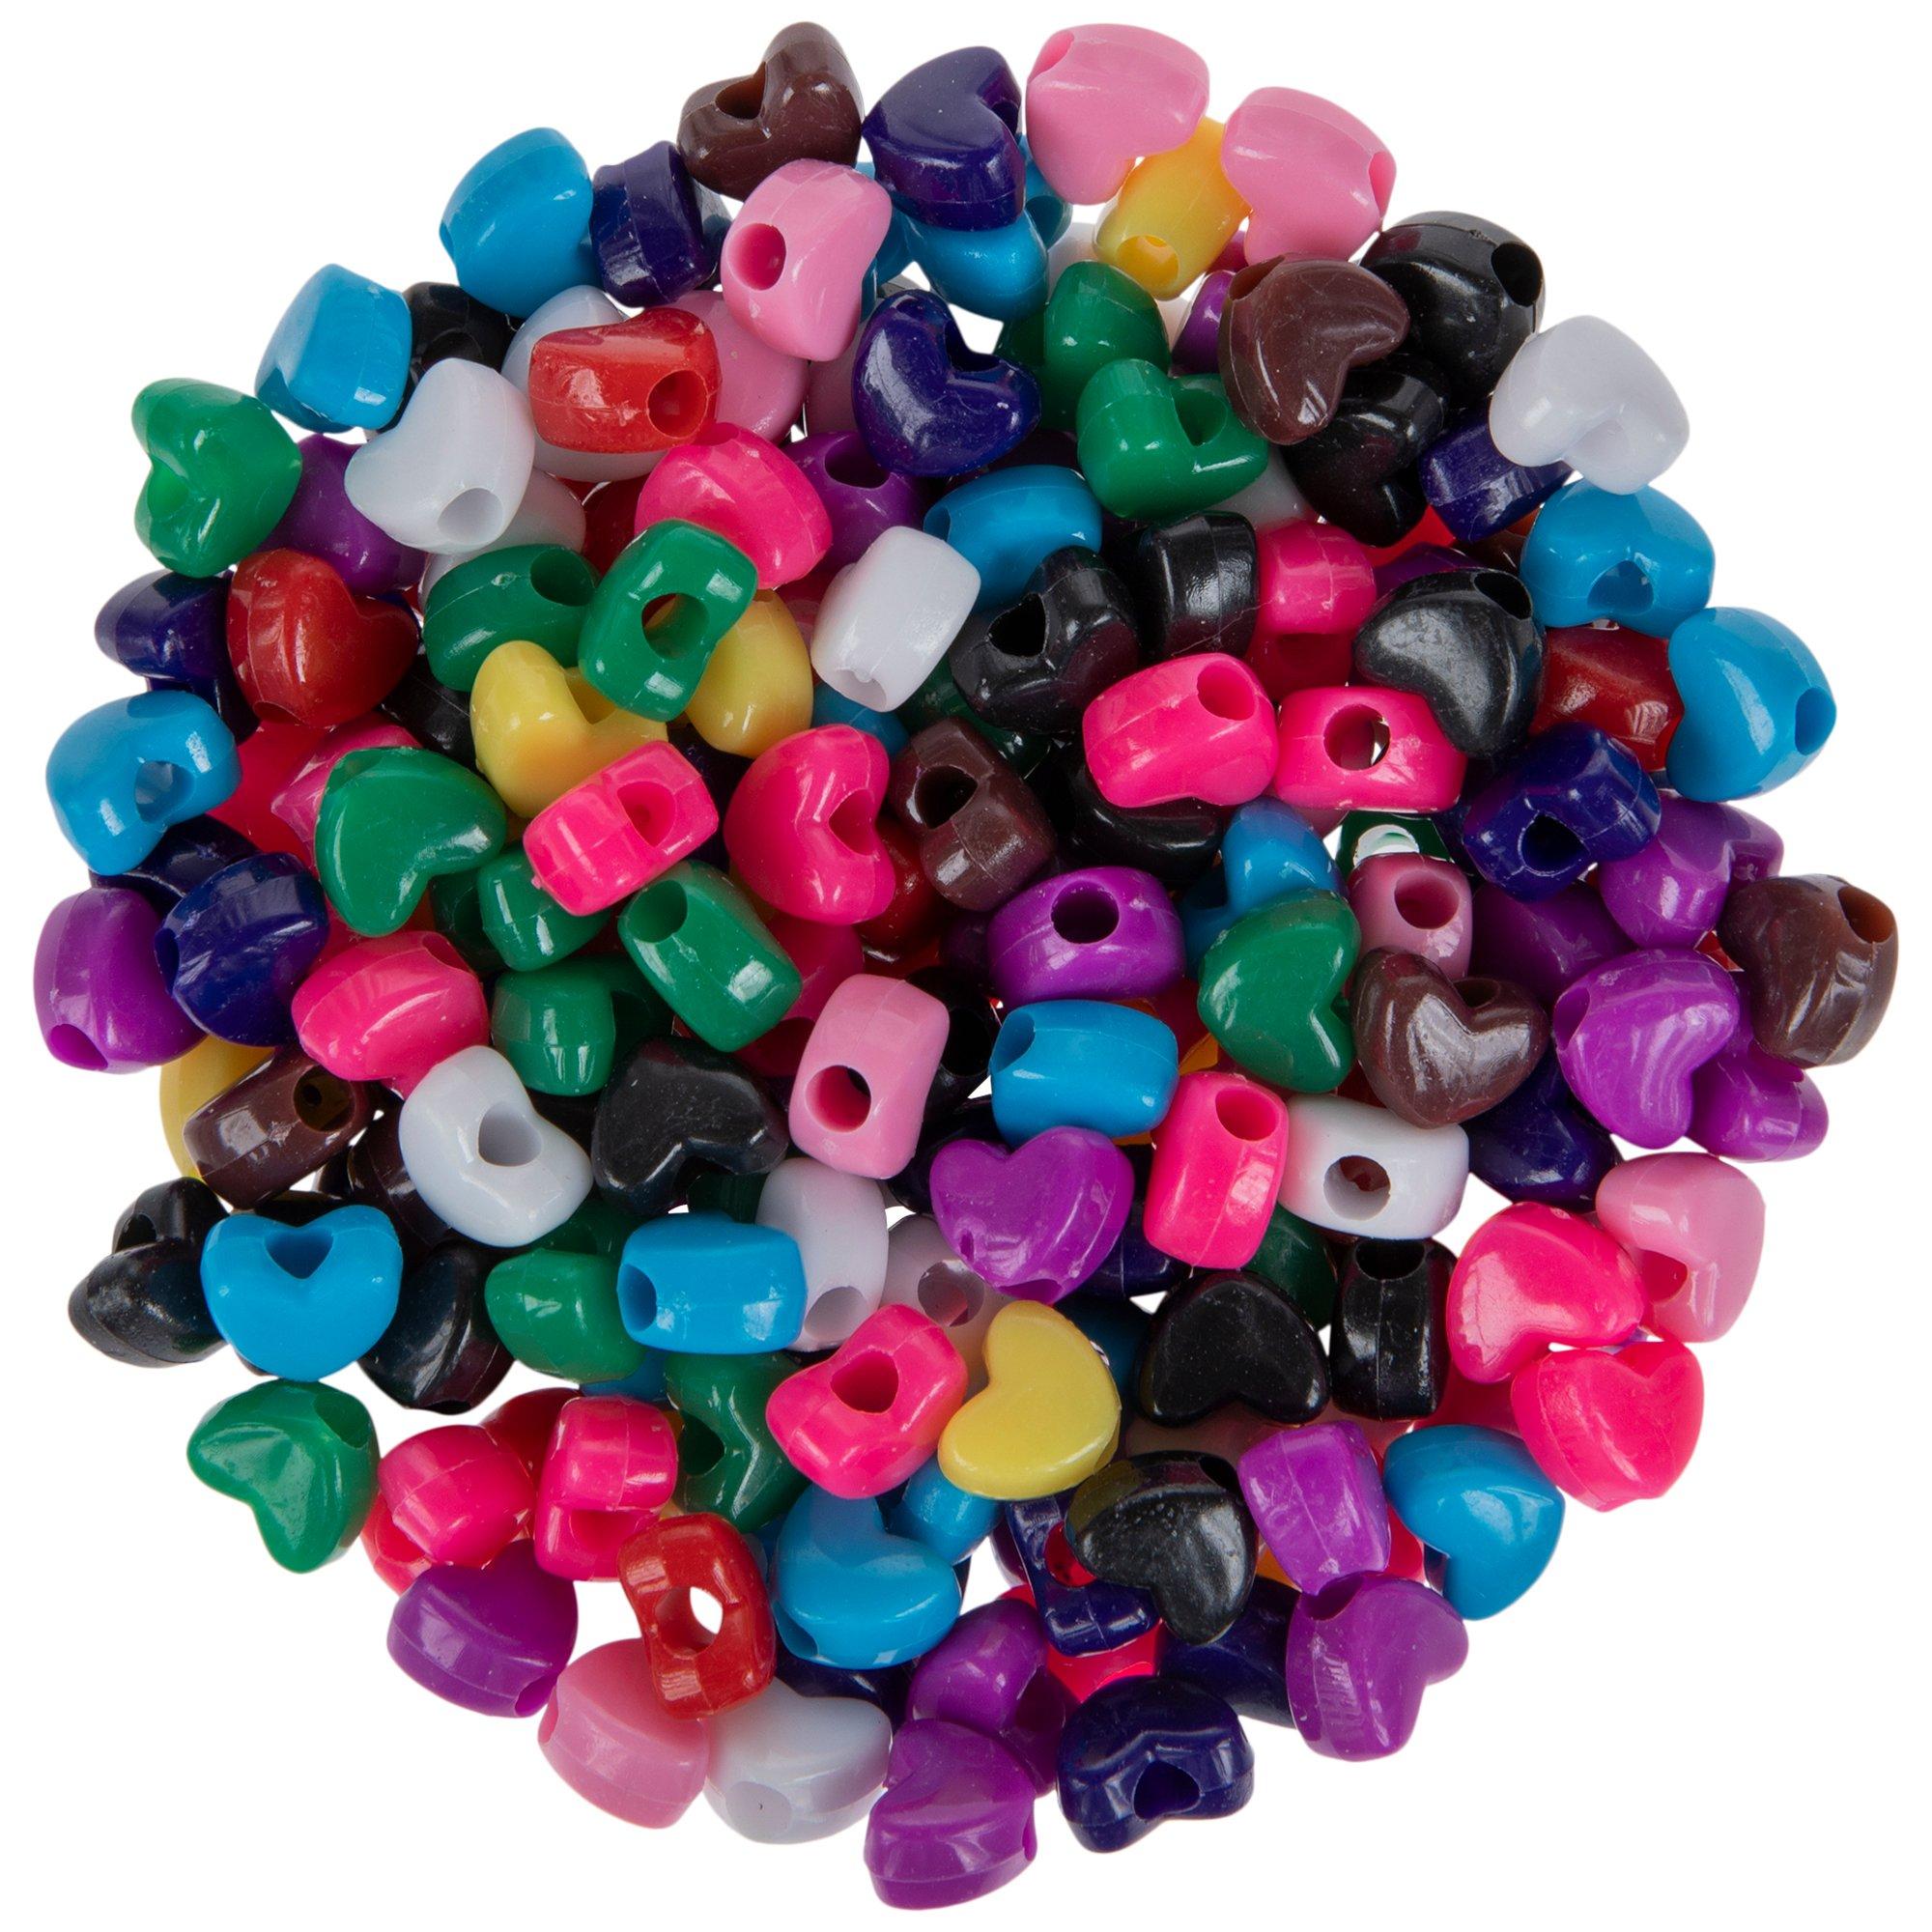 Neon Heart Pony Beads, 165 Pcs.  Craft and Classroom Supplies by